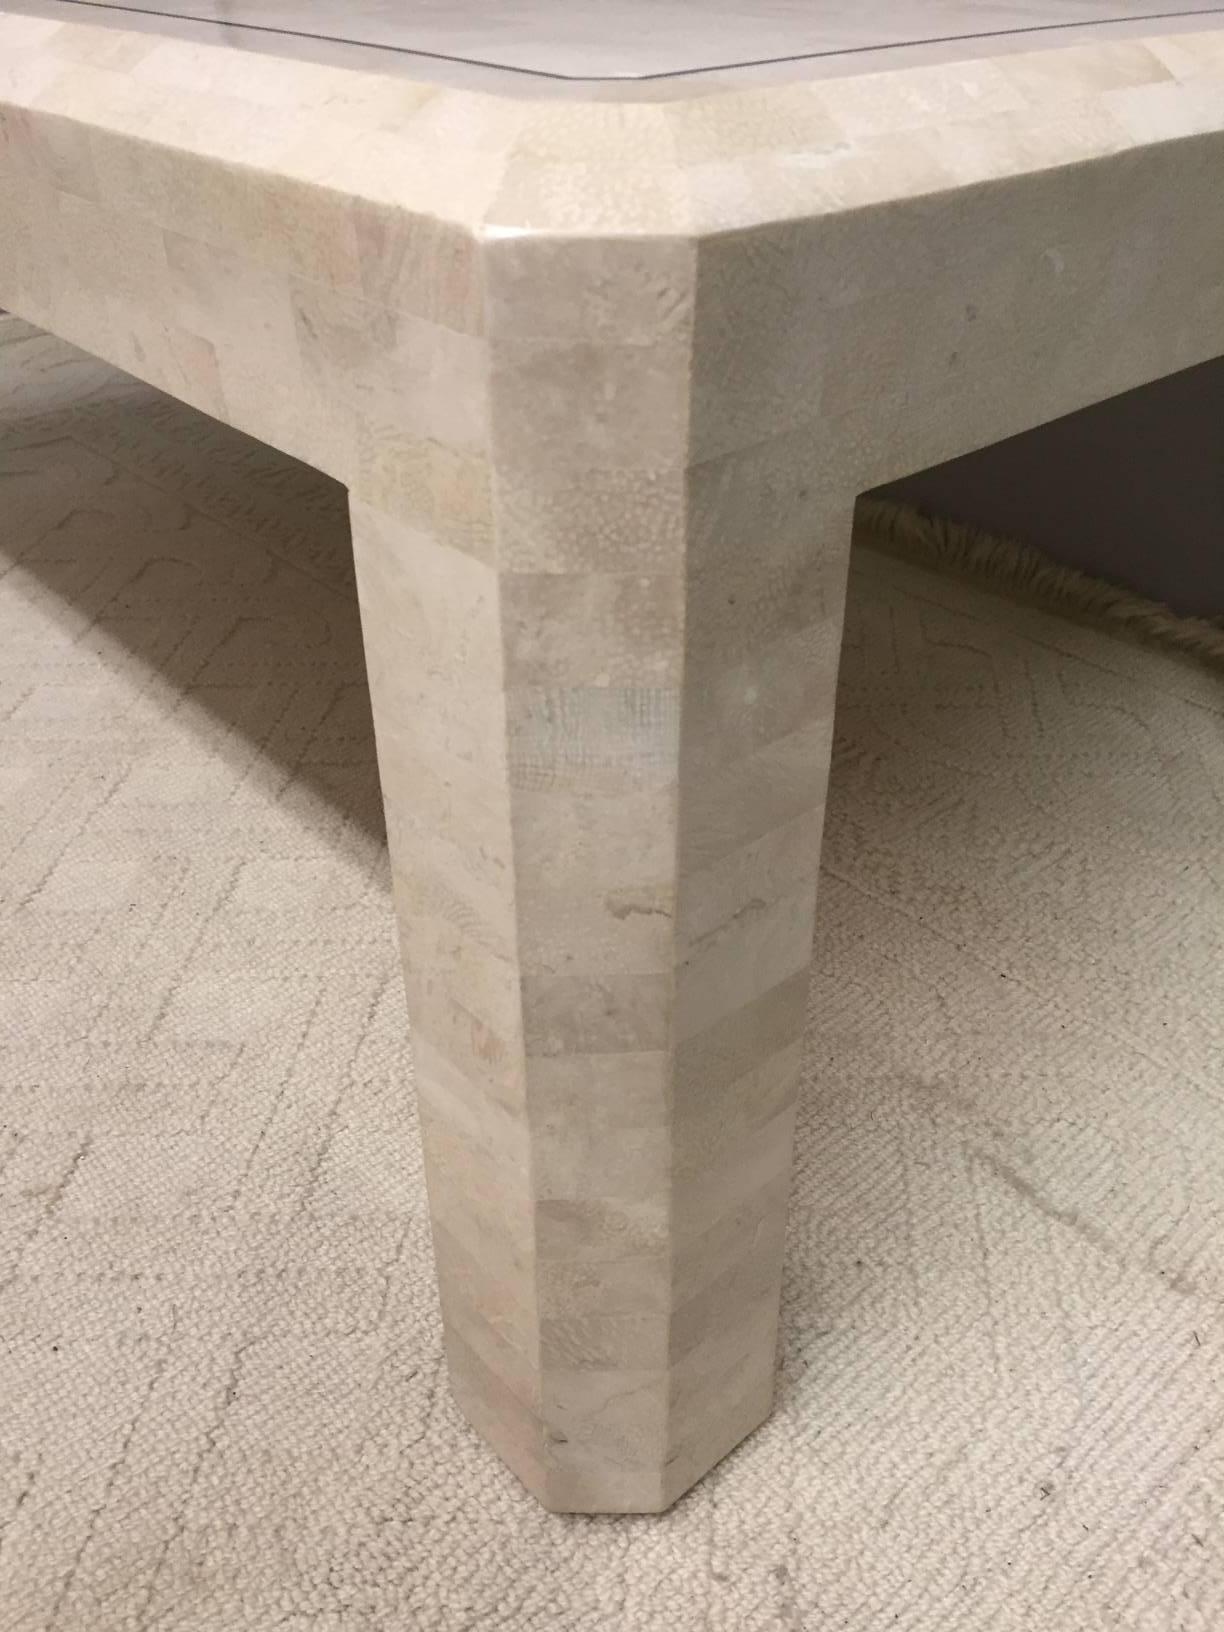 Stunning rectangular modern coffee table by Maitland-Smith made of off-white tessellated stone and having a simple carved dark brown line around the top periphery.